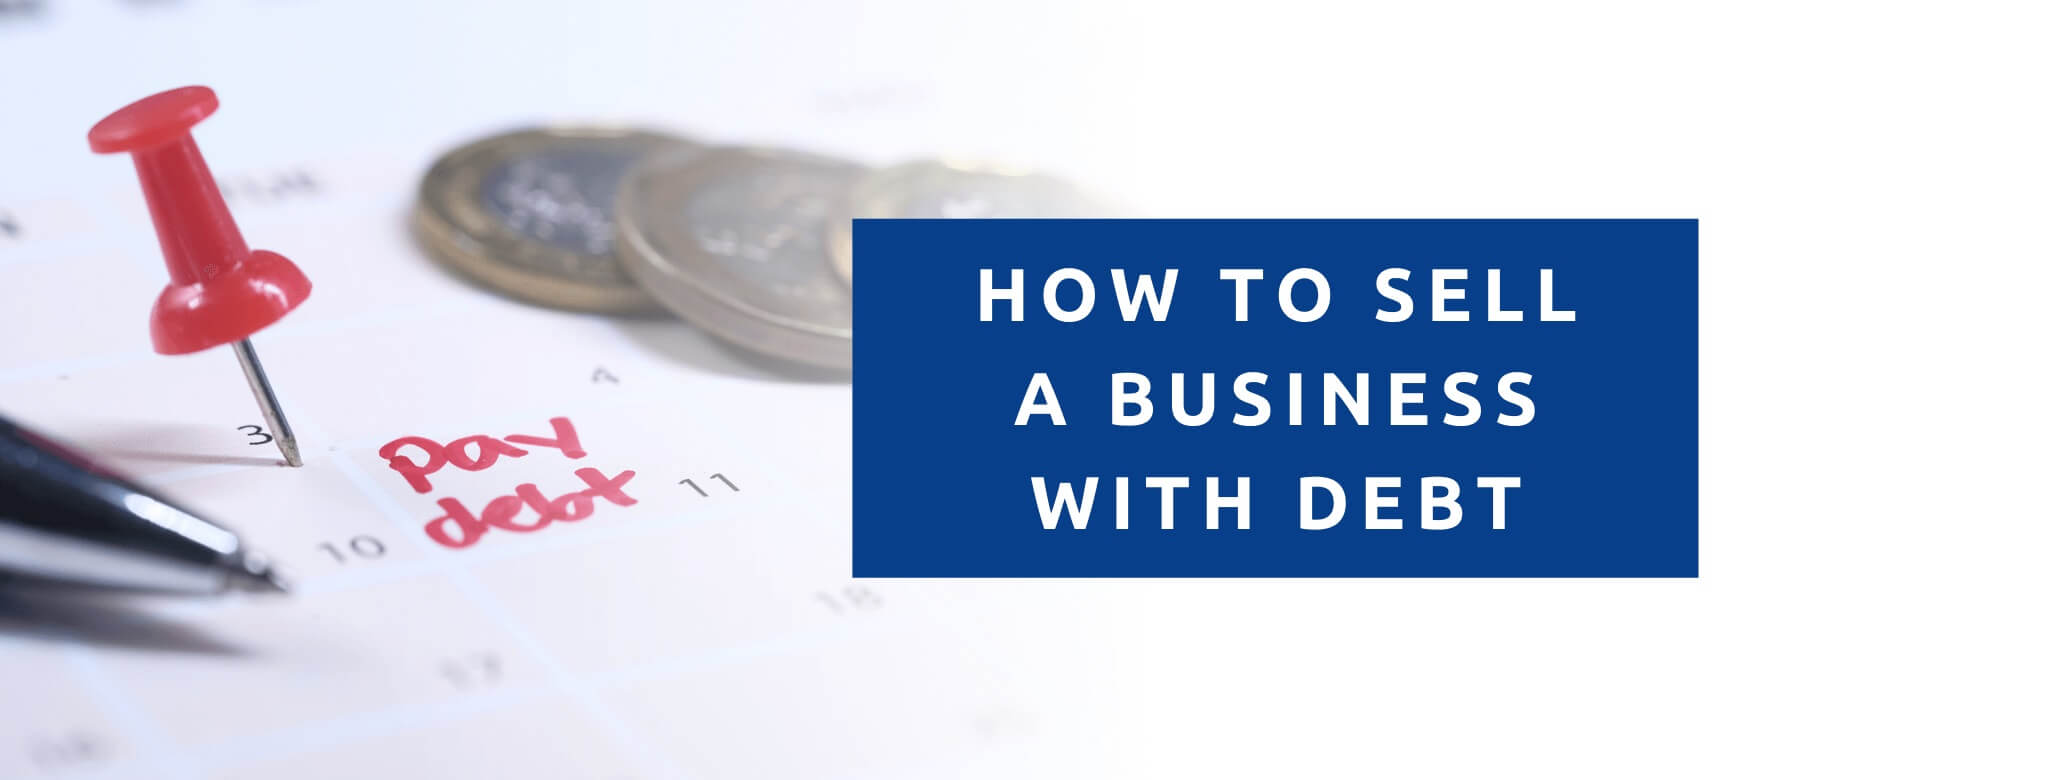 Selling Business With De bt